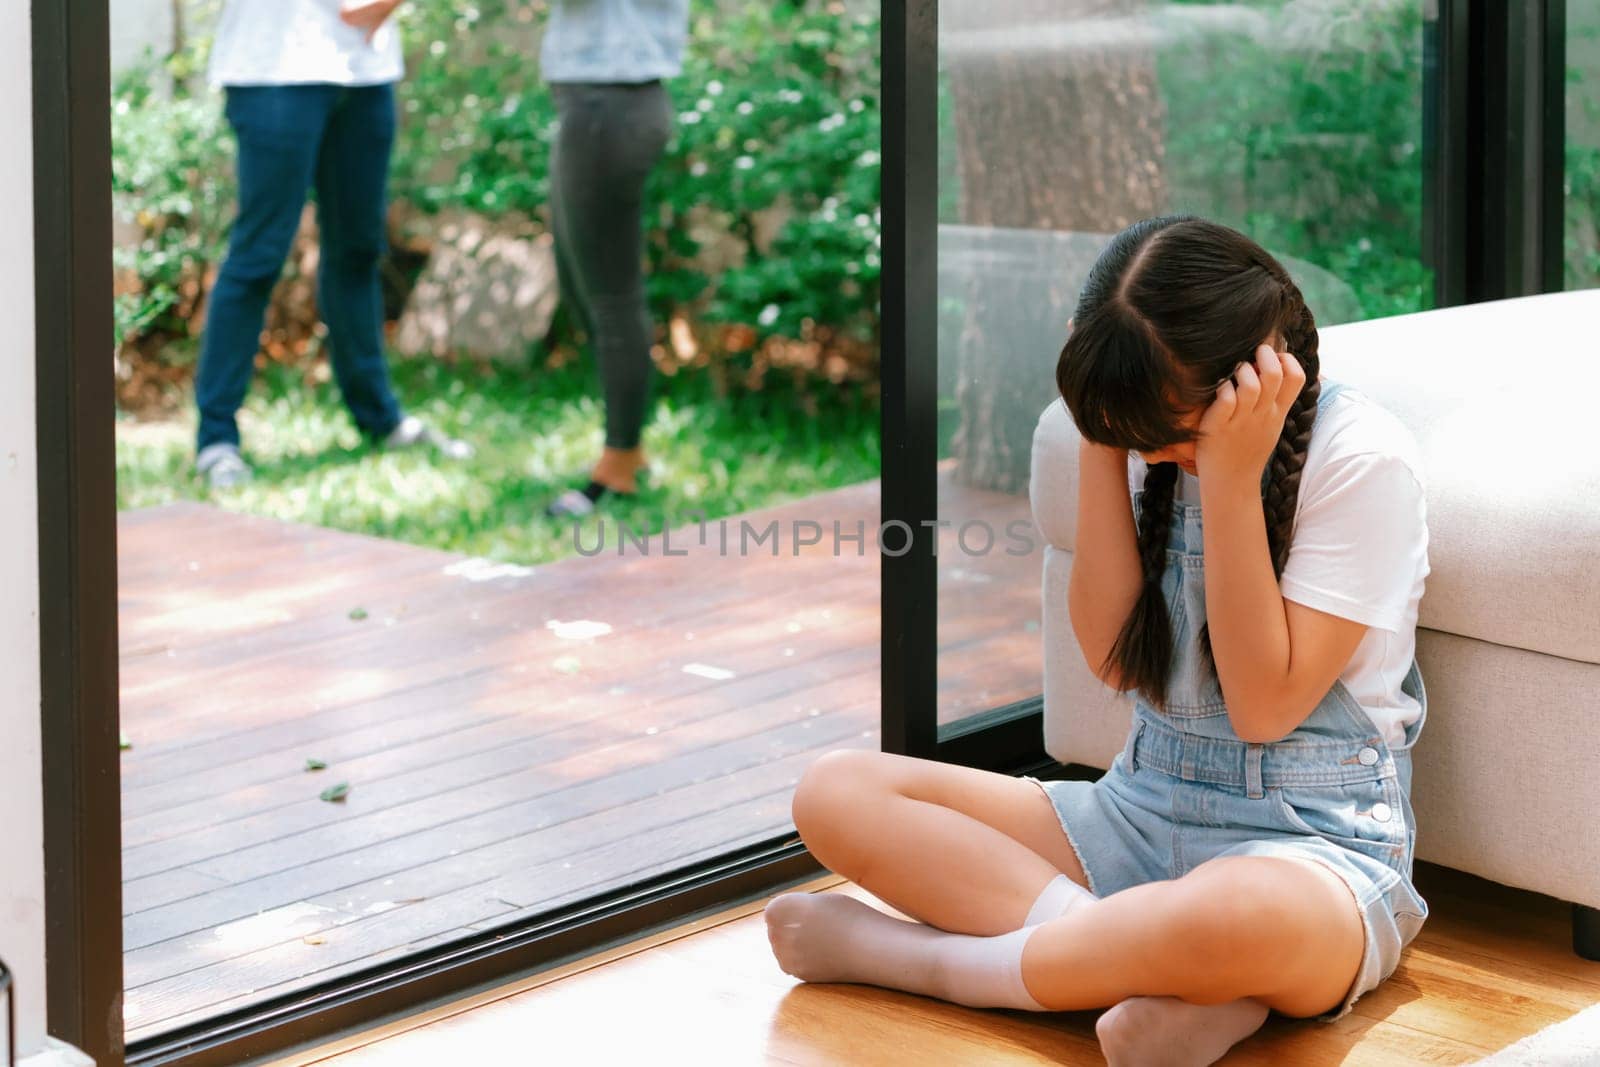 Stressed and unhappy young girl huddle in corner, cover her ears blocking sound of her parent arguing in background. Domestic violence at home and traumatic childhood develop to depression. Synchronos